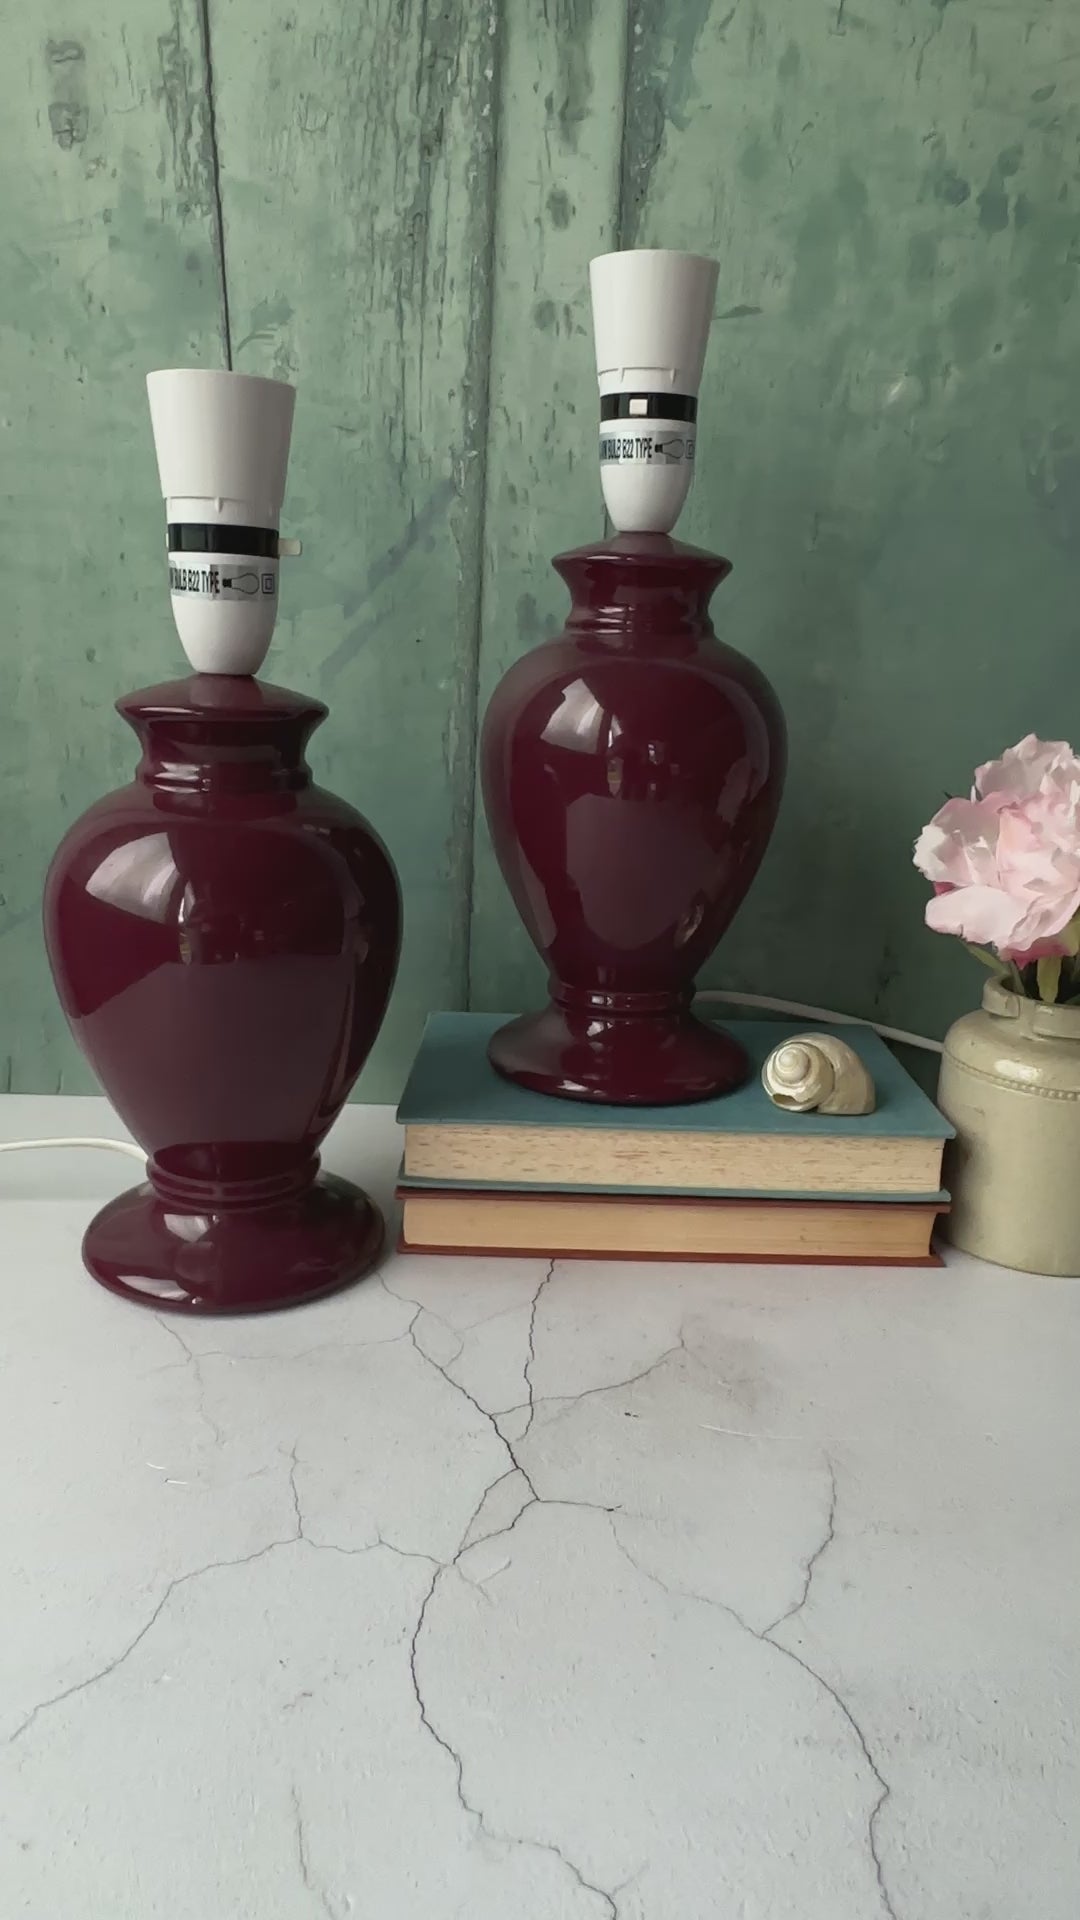 Vintage Ceramic Damson Lamp Base, Bedside Lamp, Table Lamp, Pair Of, Burgundy, Berry, Small Lamp, Country, Cottagecore, Scandi Decor